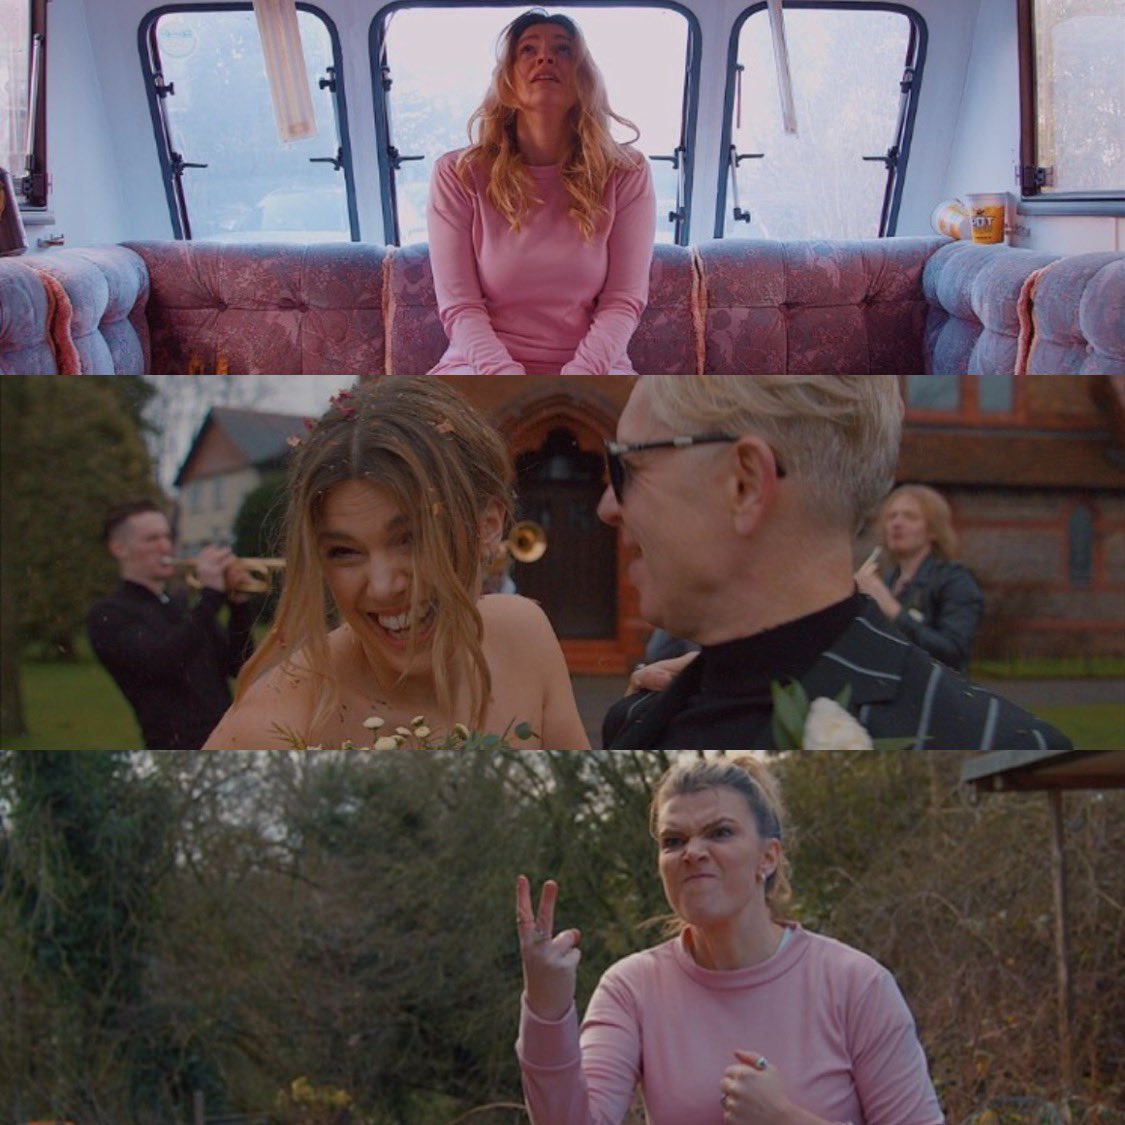 Our ELLEN JANE-THOMAS was cast in The Cuza’s new music video for their song ‘Leeches’. We absolutely loved watching this! Well done Ellen 👏🎵 

Check out the music video in the link below: 

youtu.be/-eZJ4306NJY